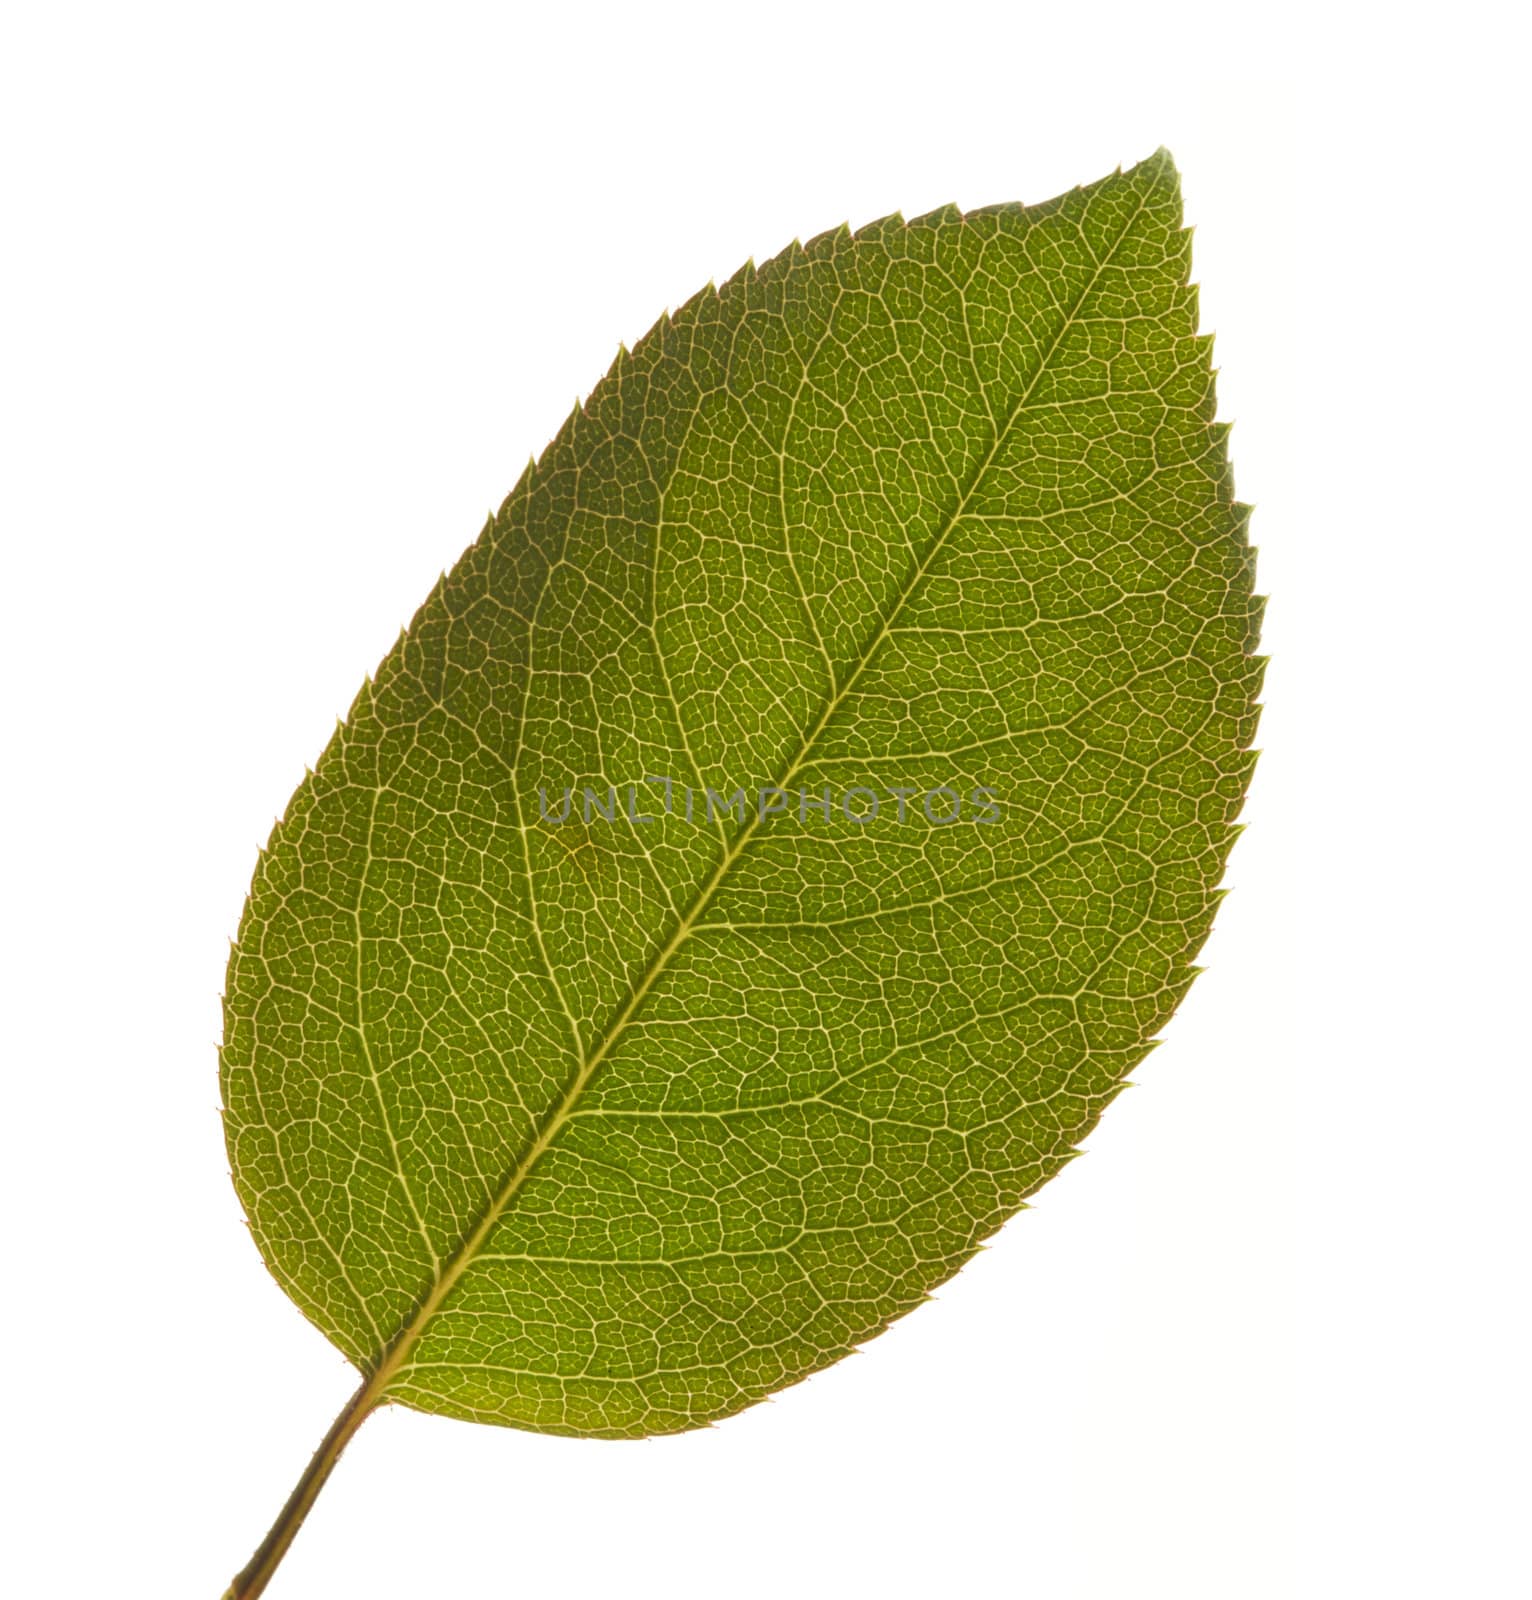 Leaf Macro Isolated by Feverpitched